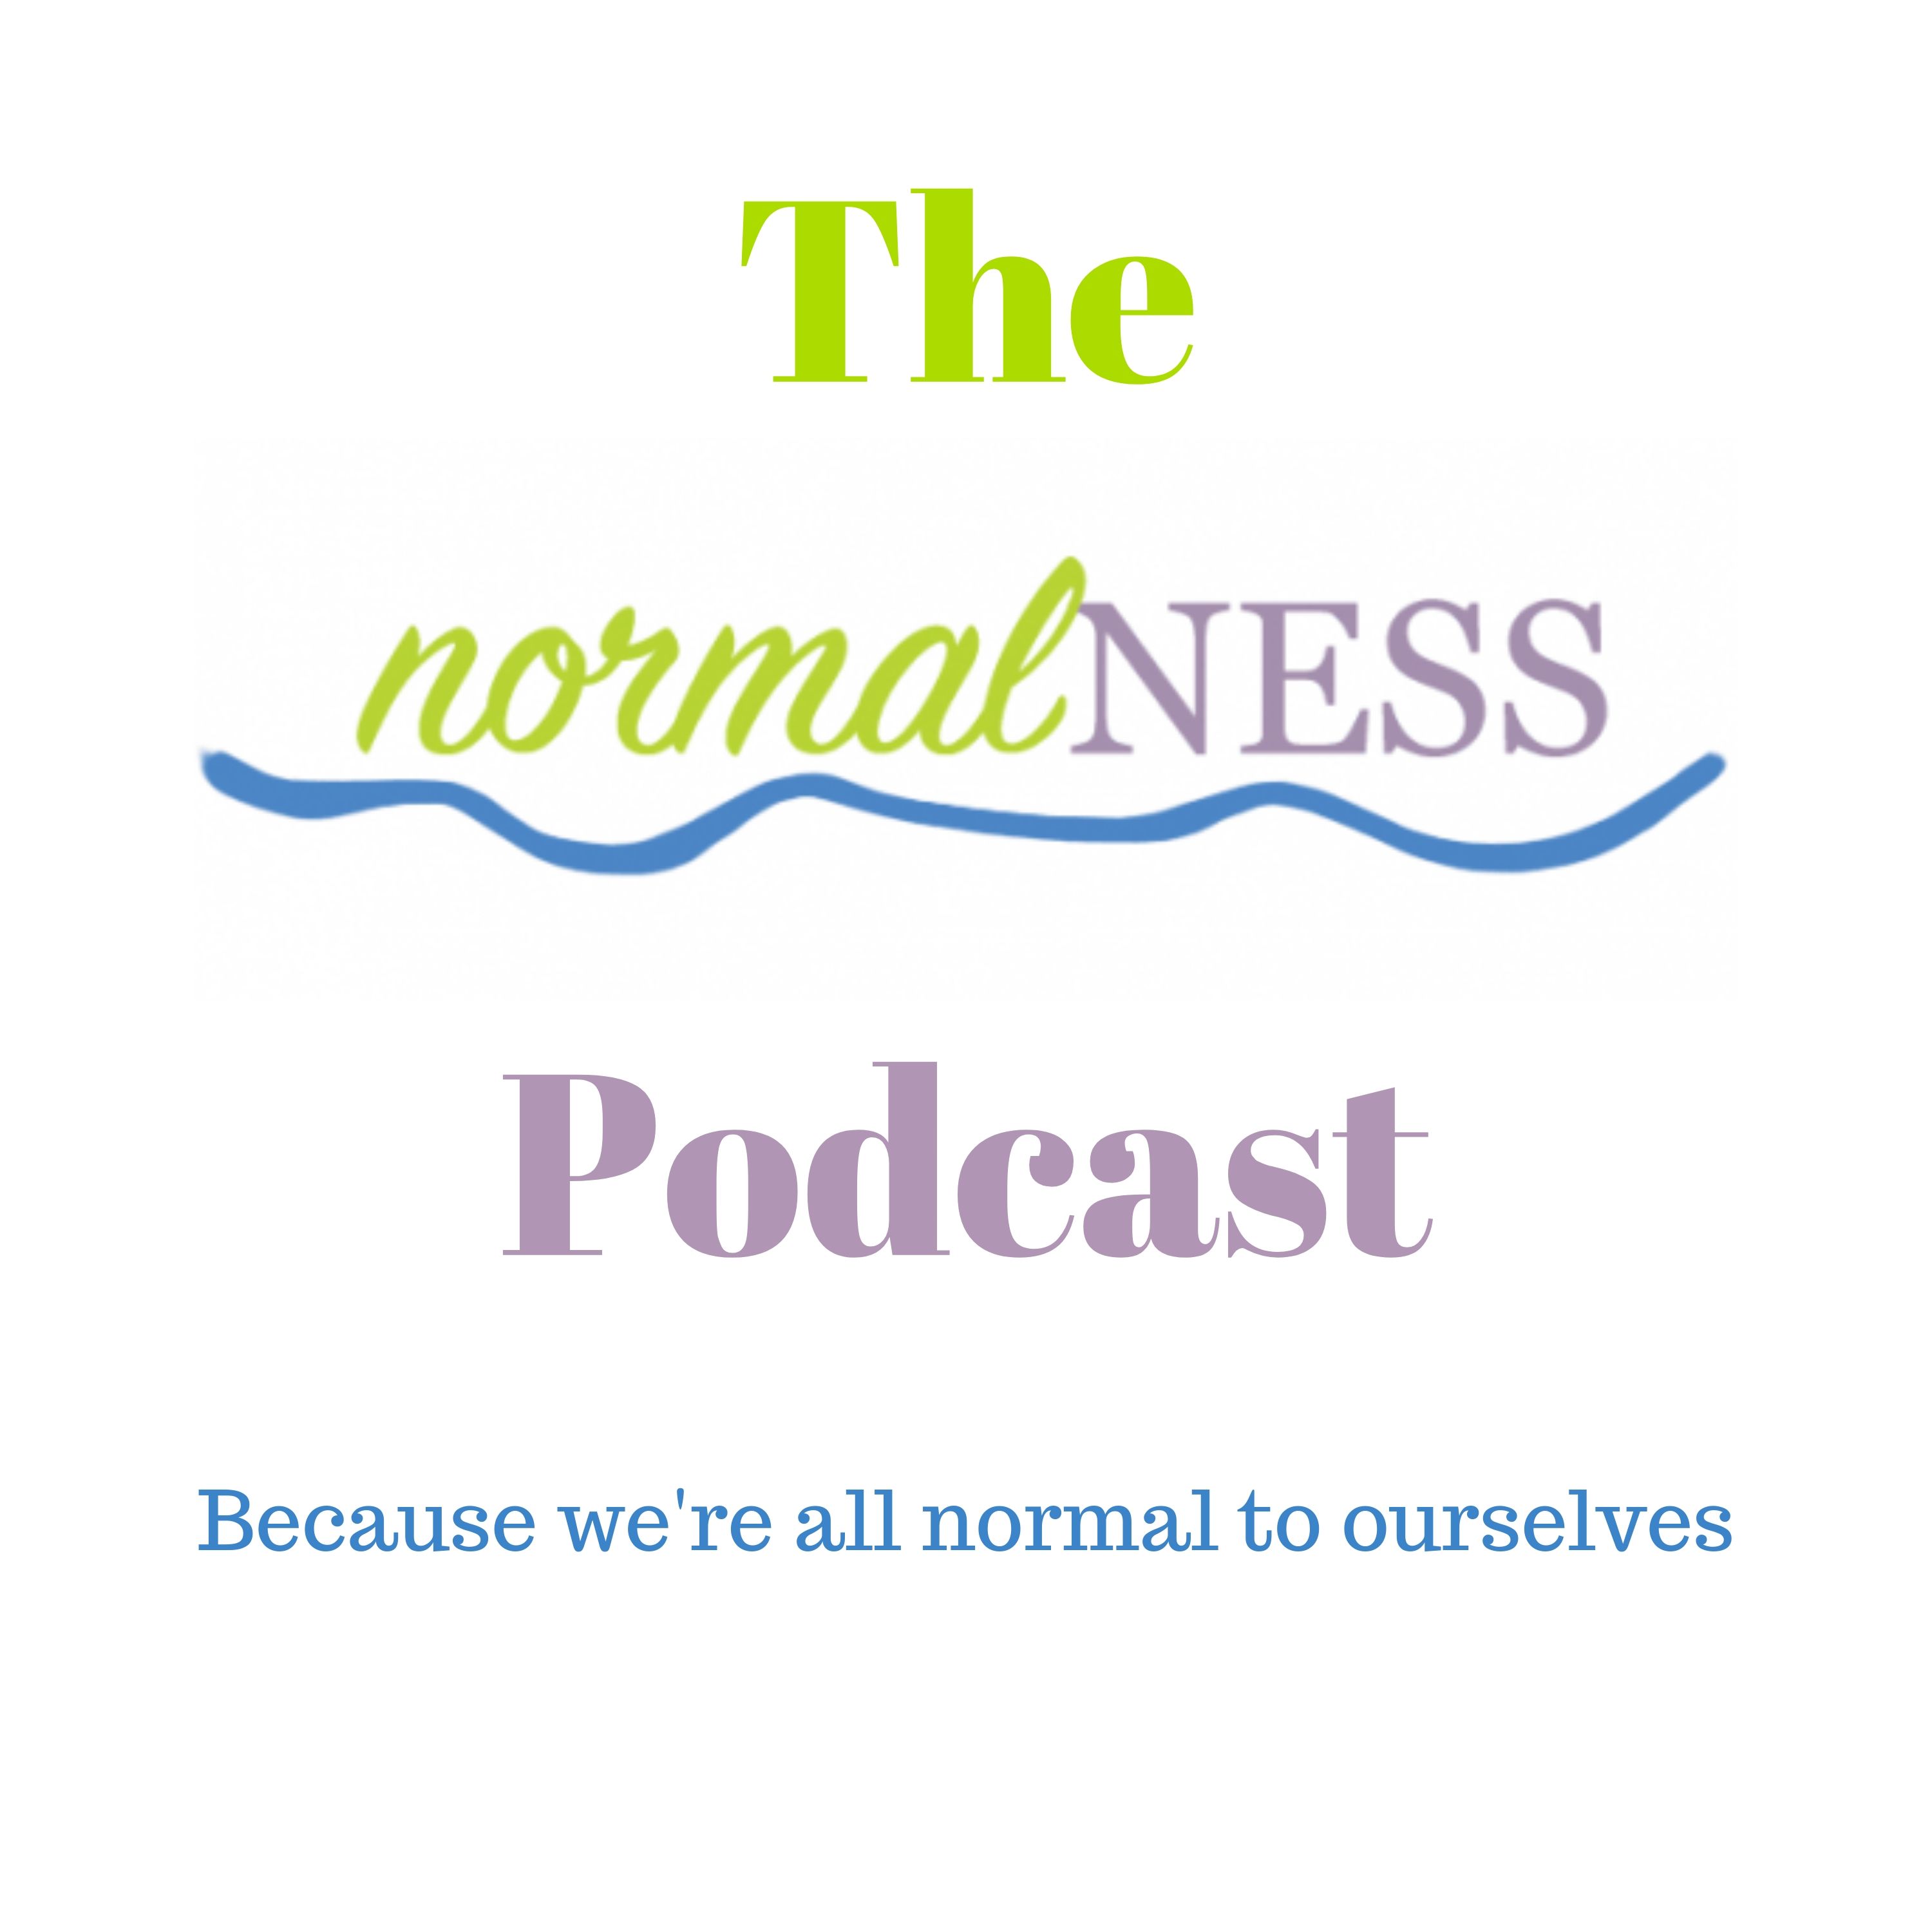 The NormalNess Podcast